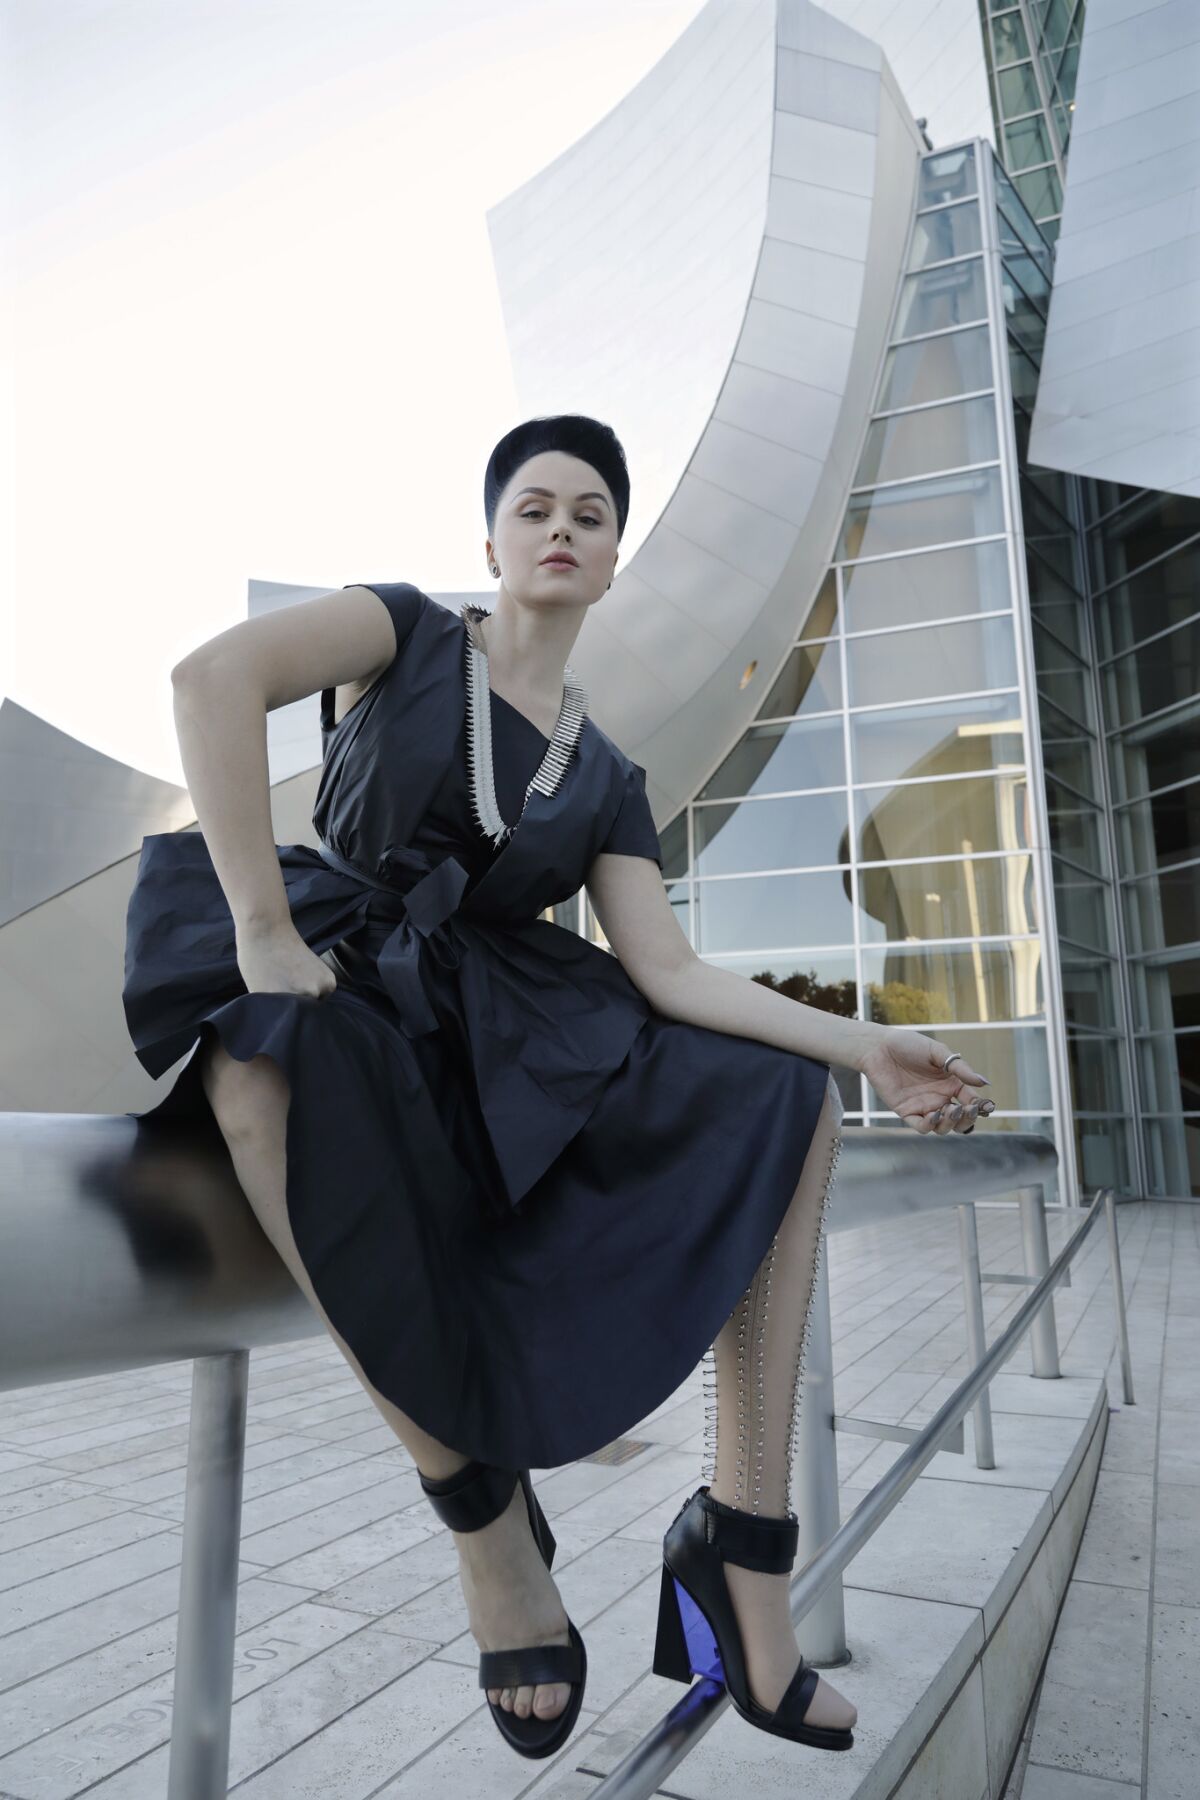 Viktoria Modesta poses in front of Walt Disney Concert Hall in downtown Los Angeles. She says the setting is apt since she spent a lot of time watching Disney films as a child while recovering from her many reconstructive surgeries.